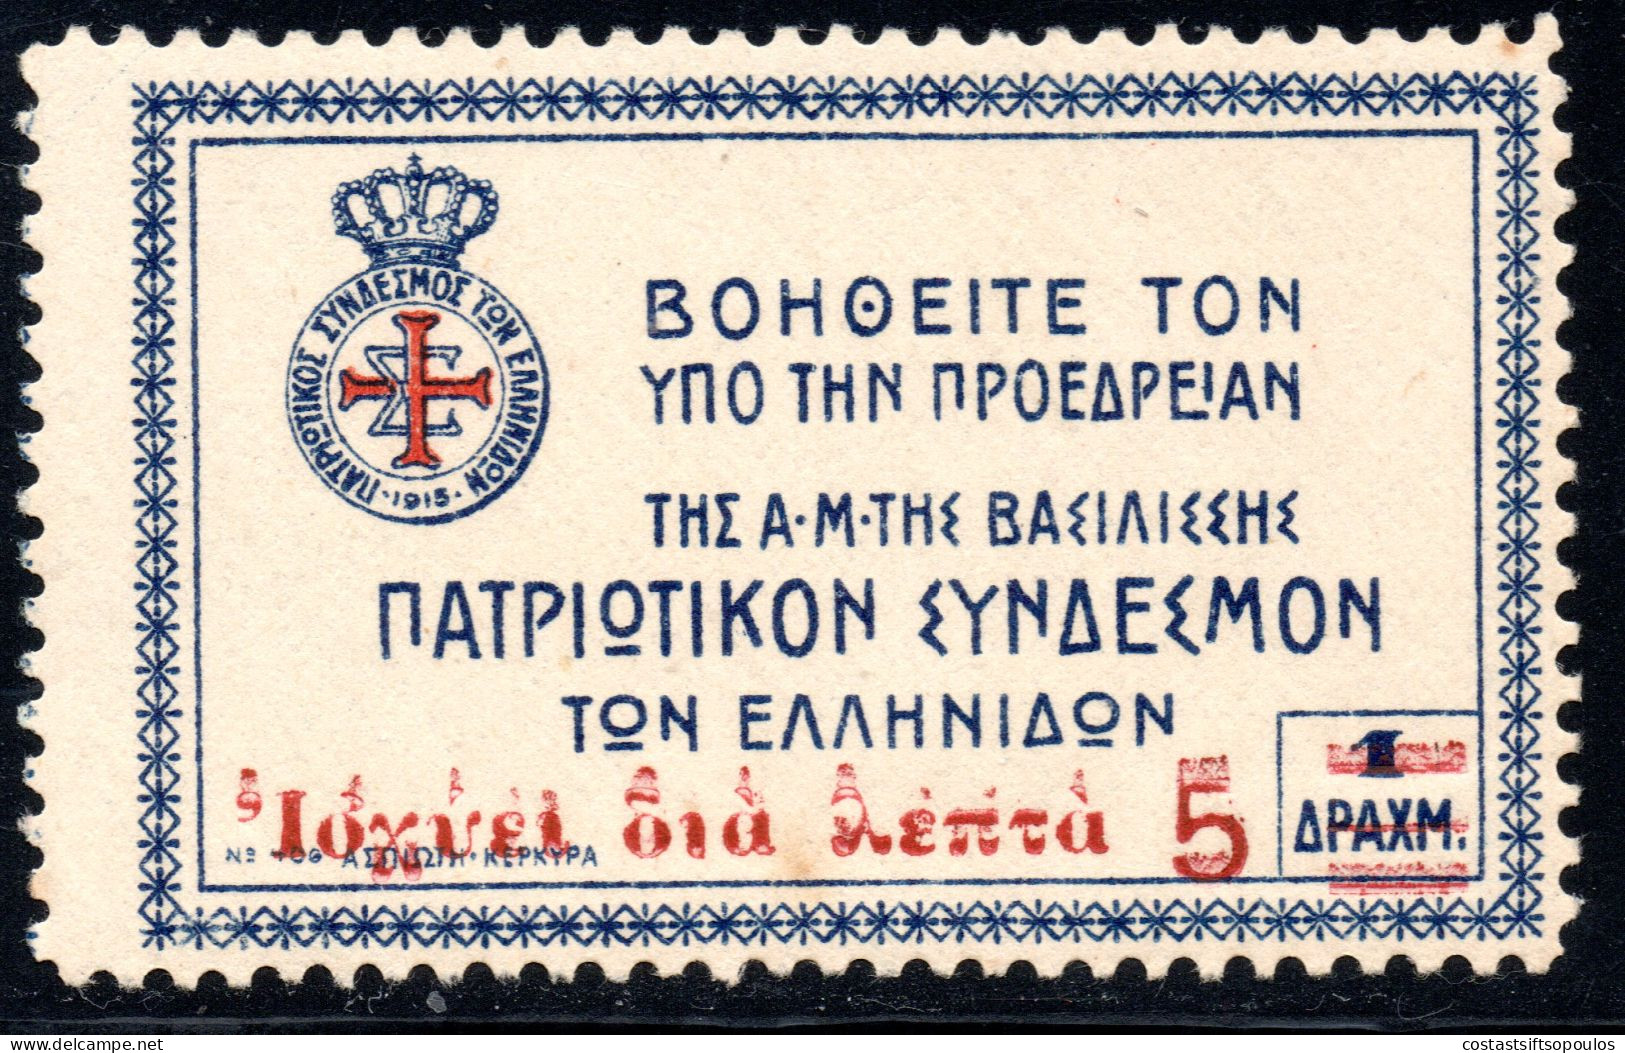 2693.GREECE, 1922 WOMEN'S PATRIOTIC LEAGUE 5L/1DR. HELLAS C59 DOUBLE SURCHARGE, UNRECORDED,MNH. - Charity Issues